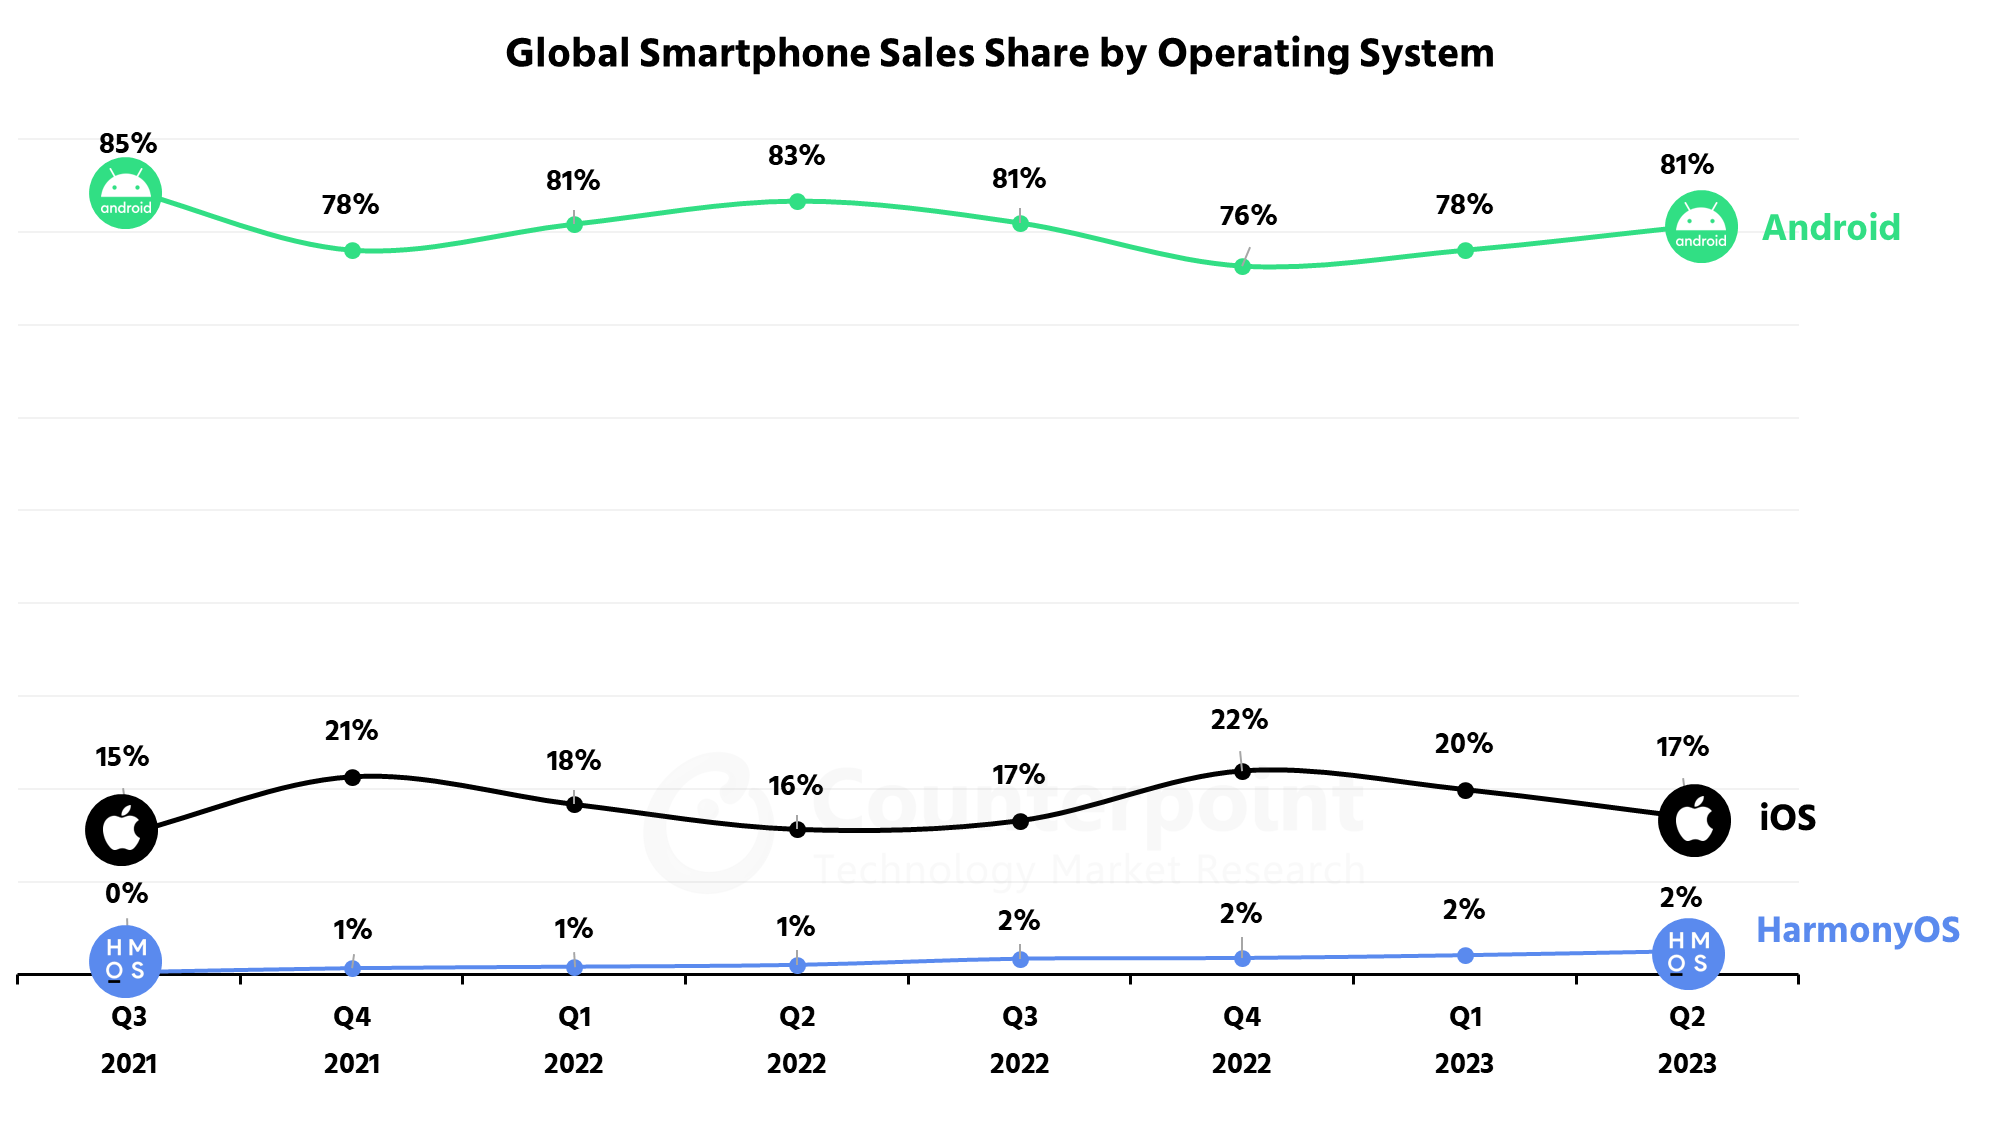 A chart showing the global smartphone OS sales share in Q2 2023